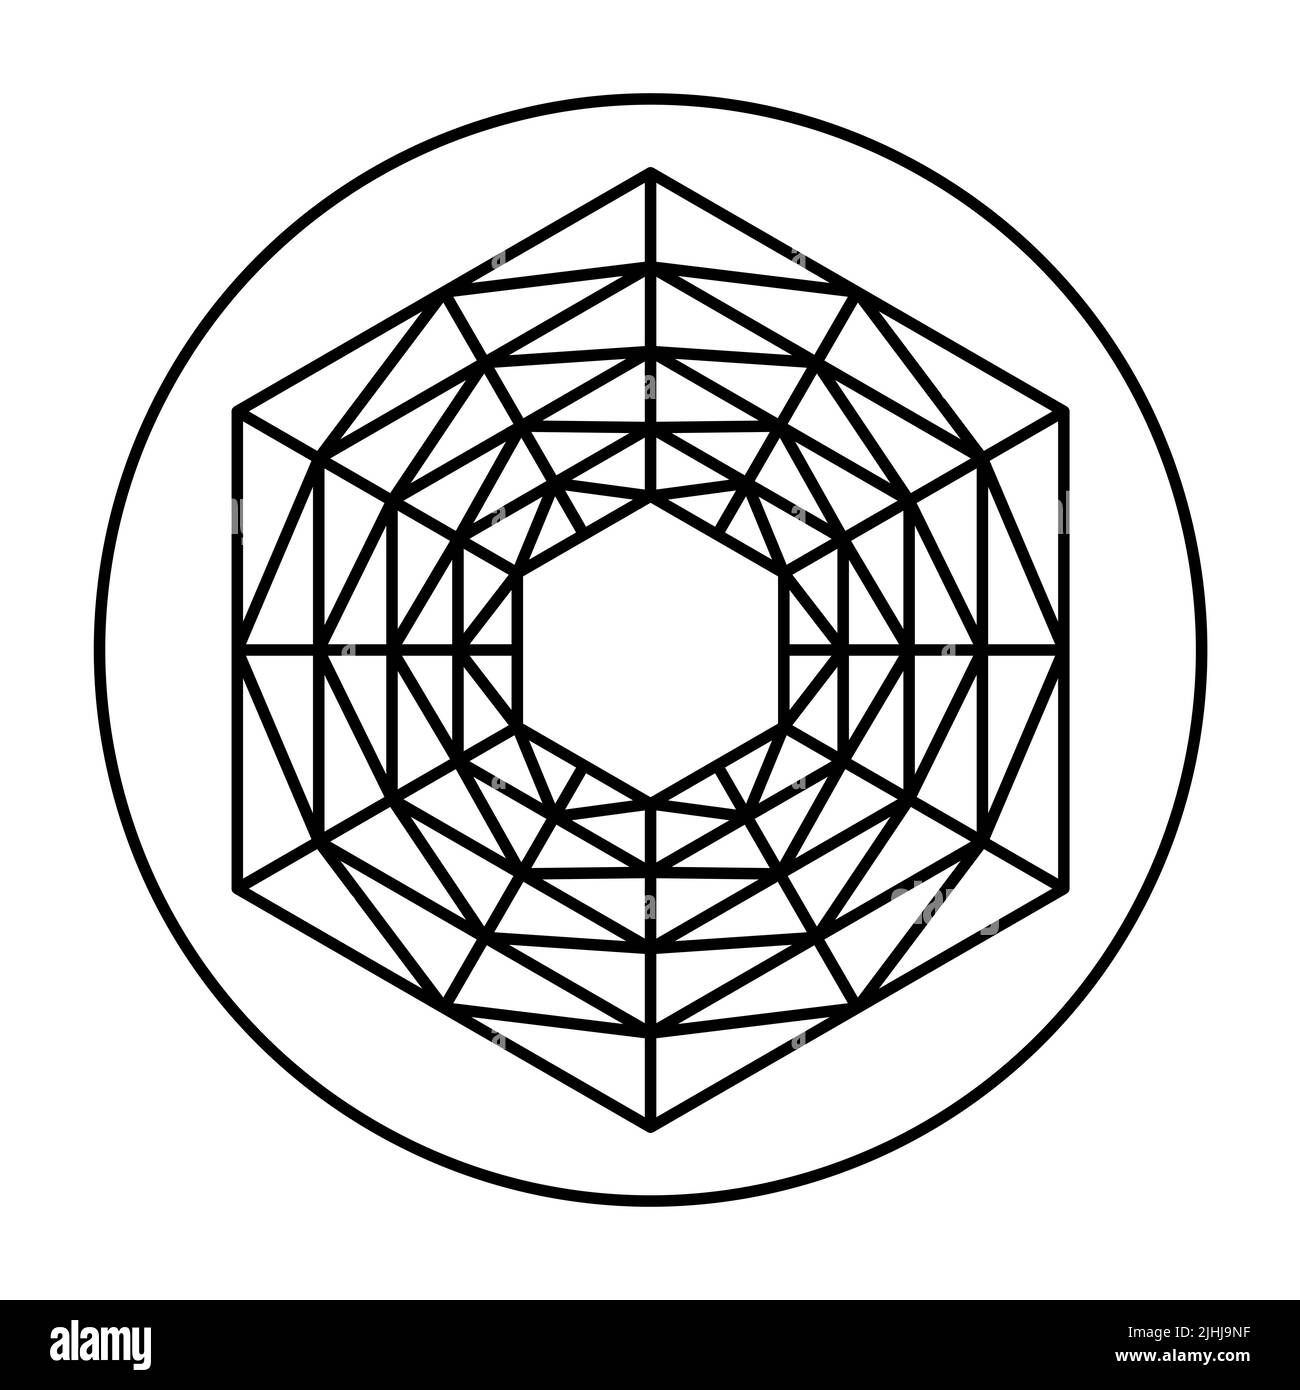 Grid pattern with symmetrical hexagonal shape, in a circle. Five hexagons, placed inside each other, connected with grid lines. Stock Photo